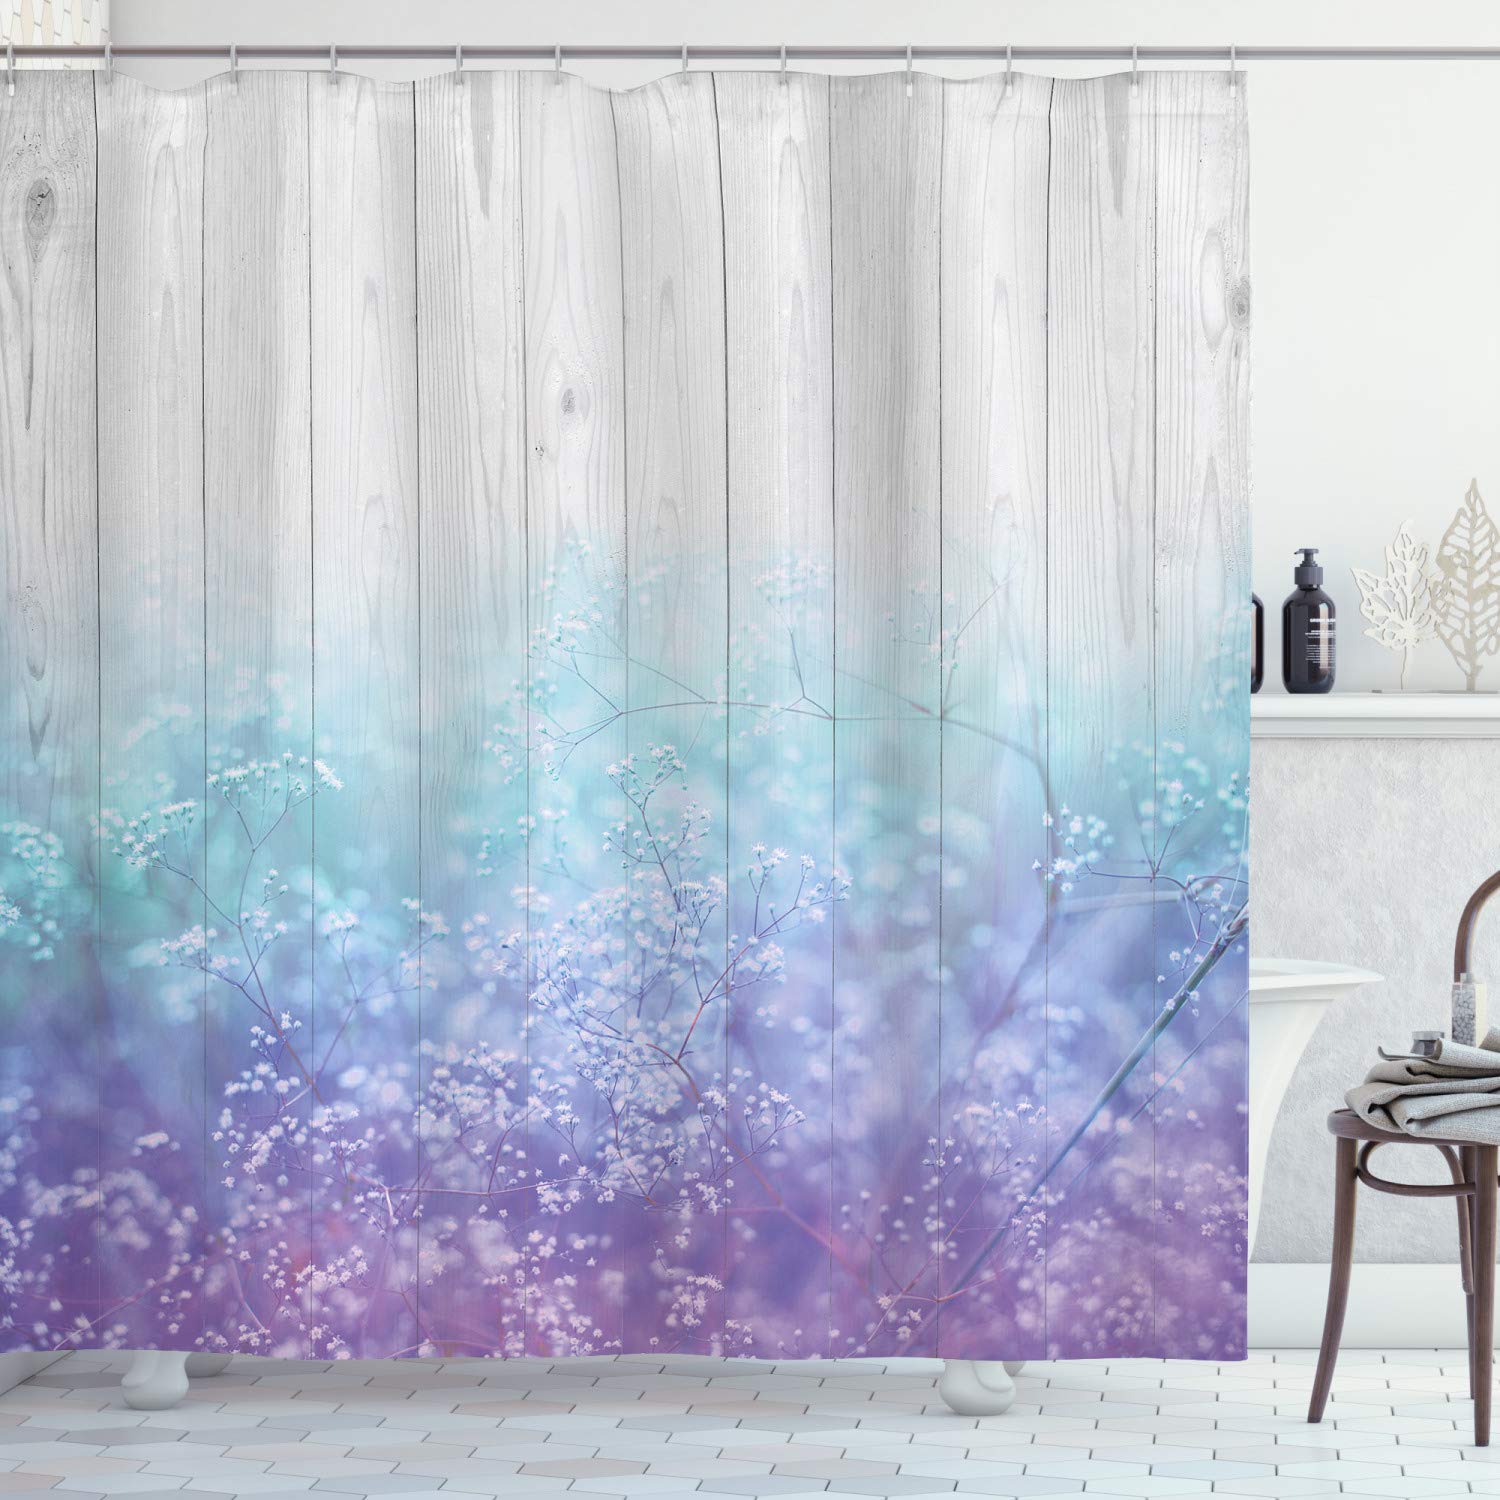 Ambesonne Garden Shower Curtain, Dreamy Abstract Garden Perennial Petals Branches in Pastel Colors Artwork Print, Cloth Fabric Bathroom Decor Set with Hooks, 75" Long, Lavender Blue